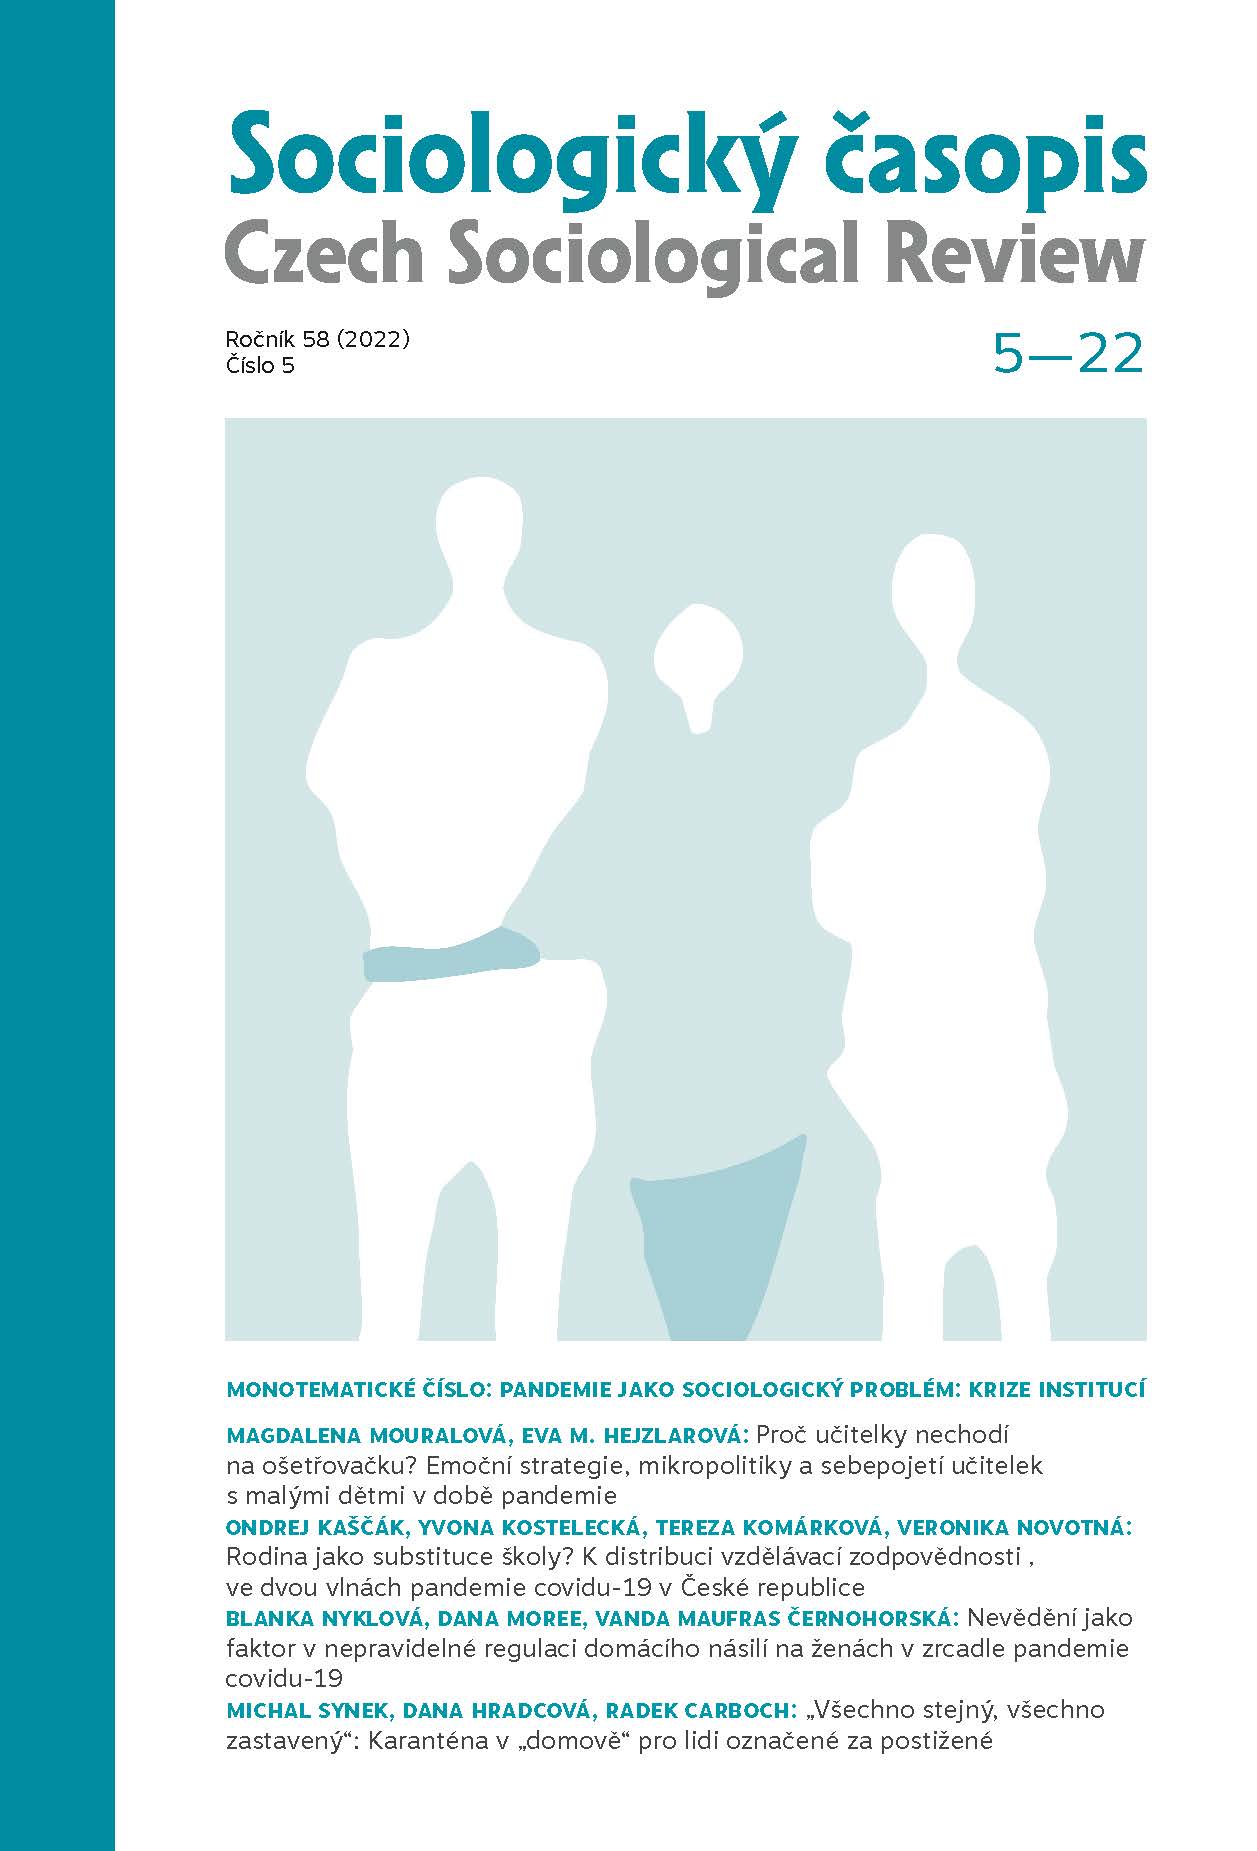 Why Teachers Do Not Take Child Sick Leave? Emotional Strategies, Micropolitics, and the Self-Conception of Teachers with Small Children in a Pandemic Cover Image